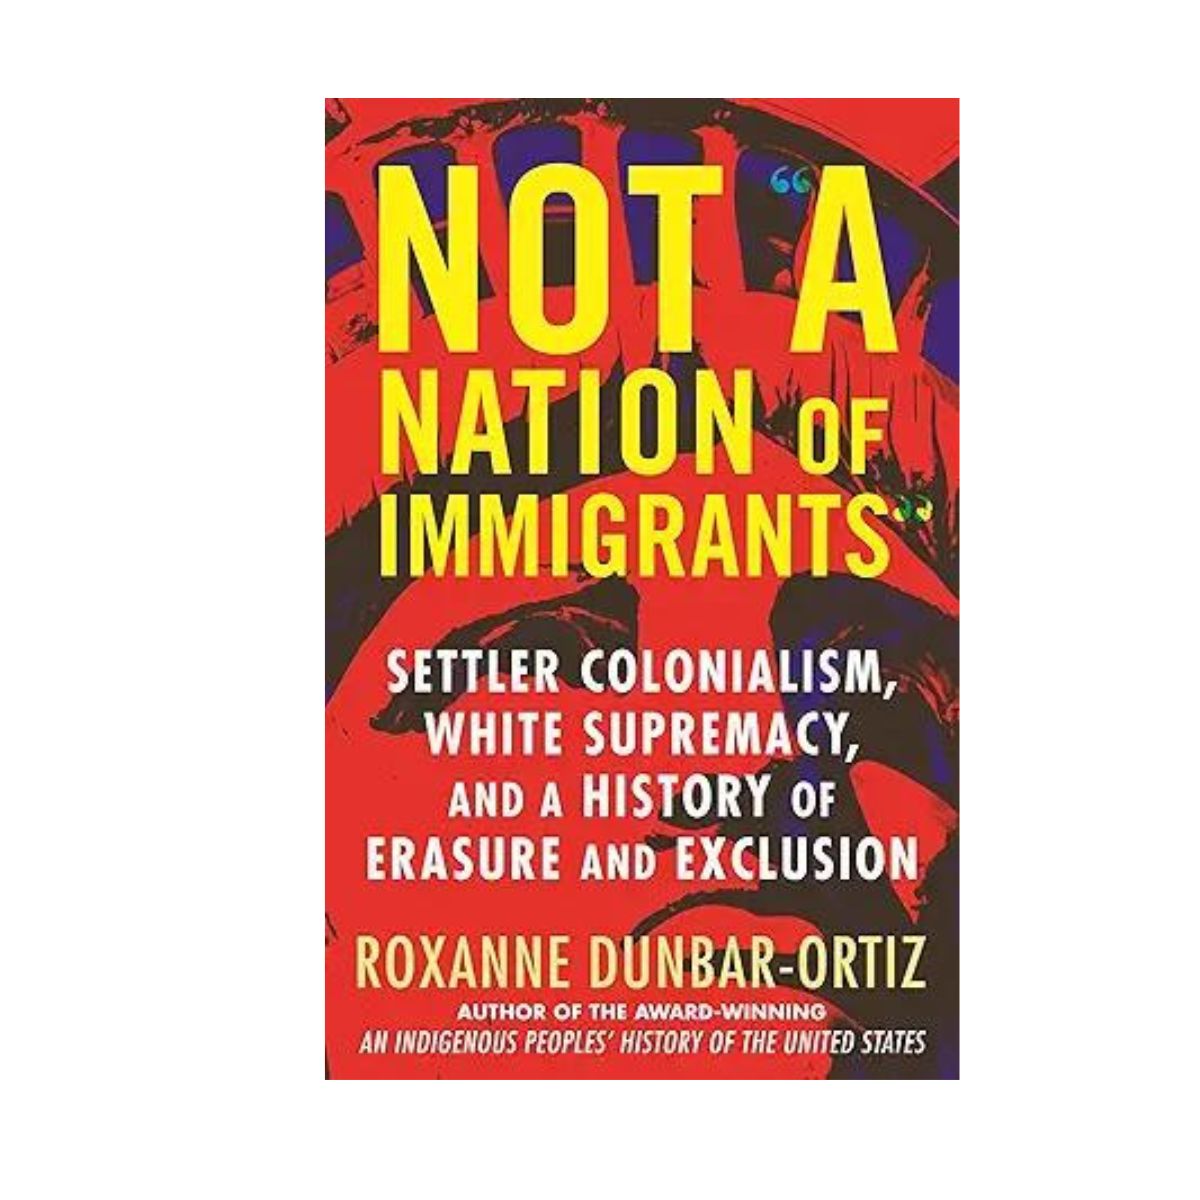 Not "A Nation of Immigrants": Settler Colonialism, White Supremacy, and a History of Erasure and Exclusion